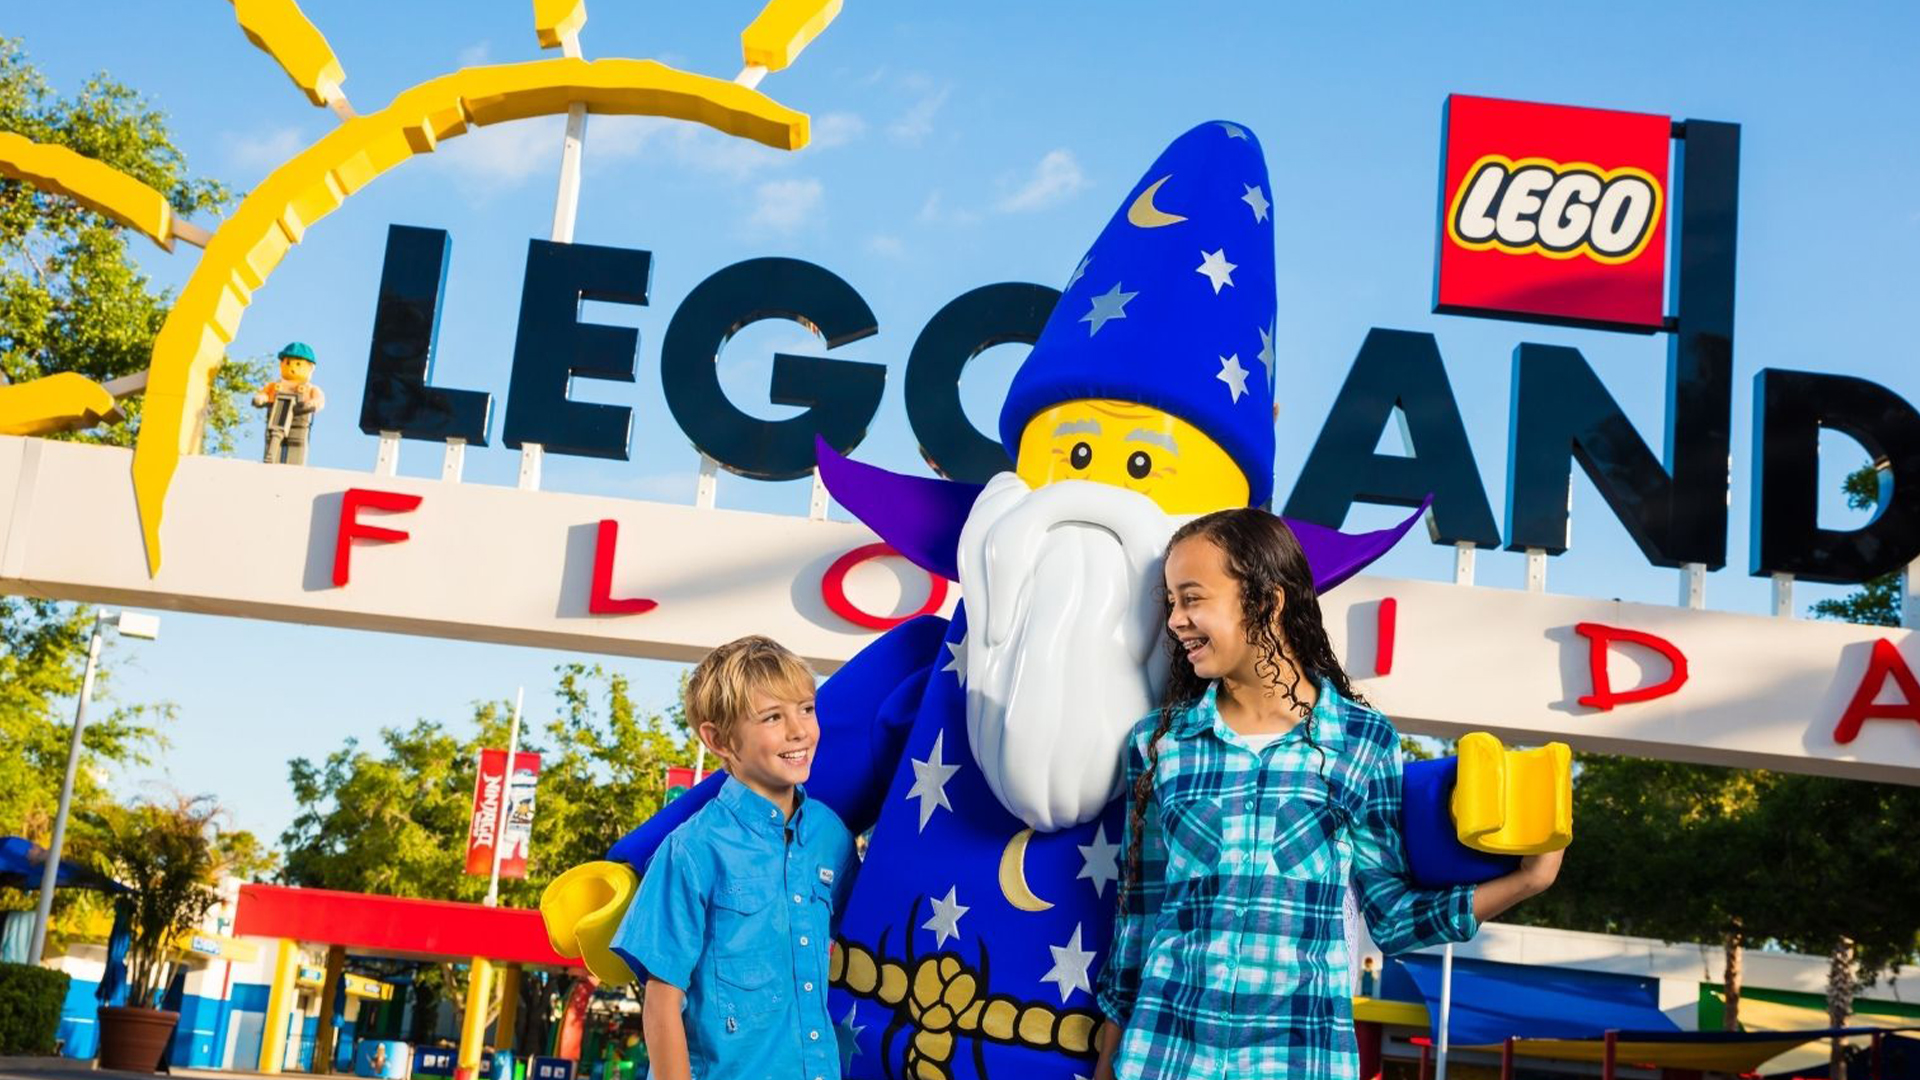 Legoland Florida Tickets For $25 Dollars Over 70% Off Gate Price